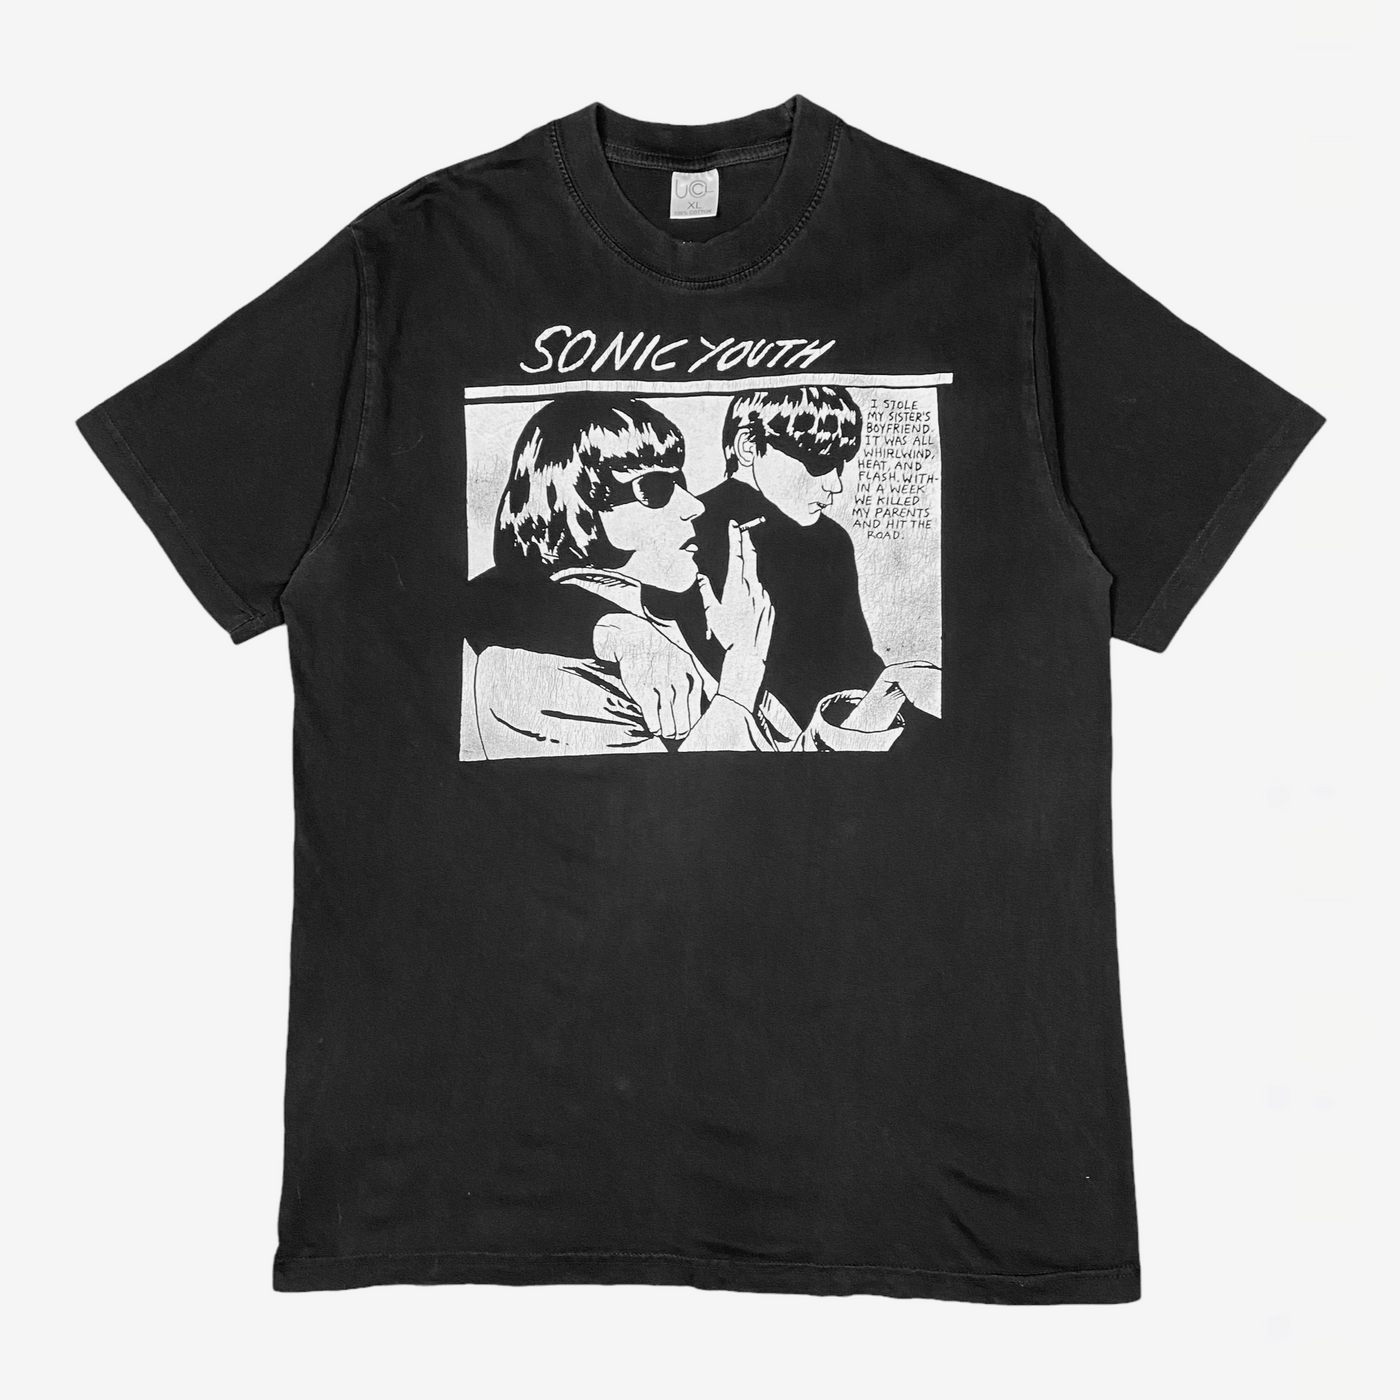 LATE 90s SONIC YOUTH T-SHIRT